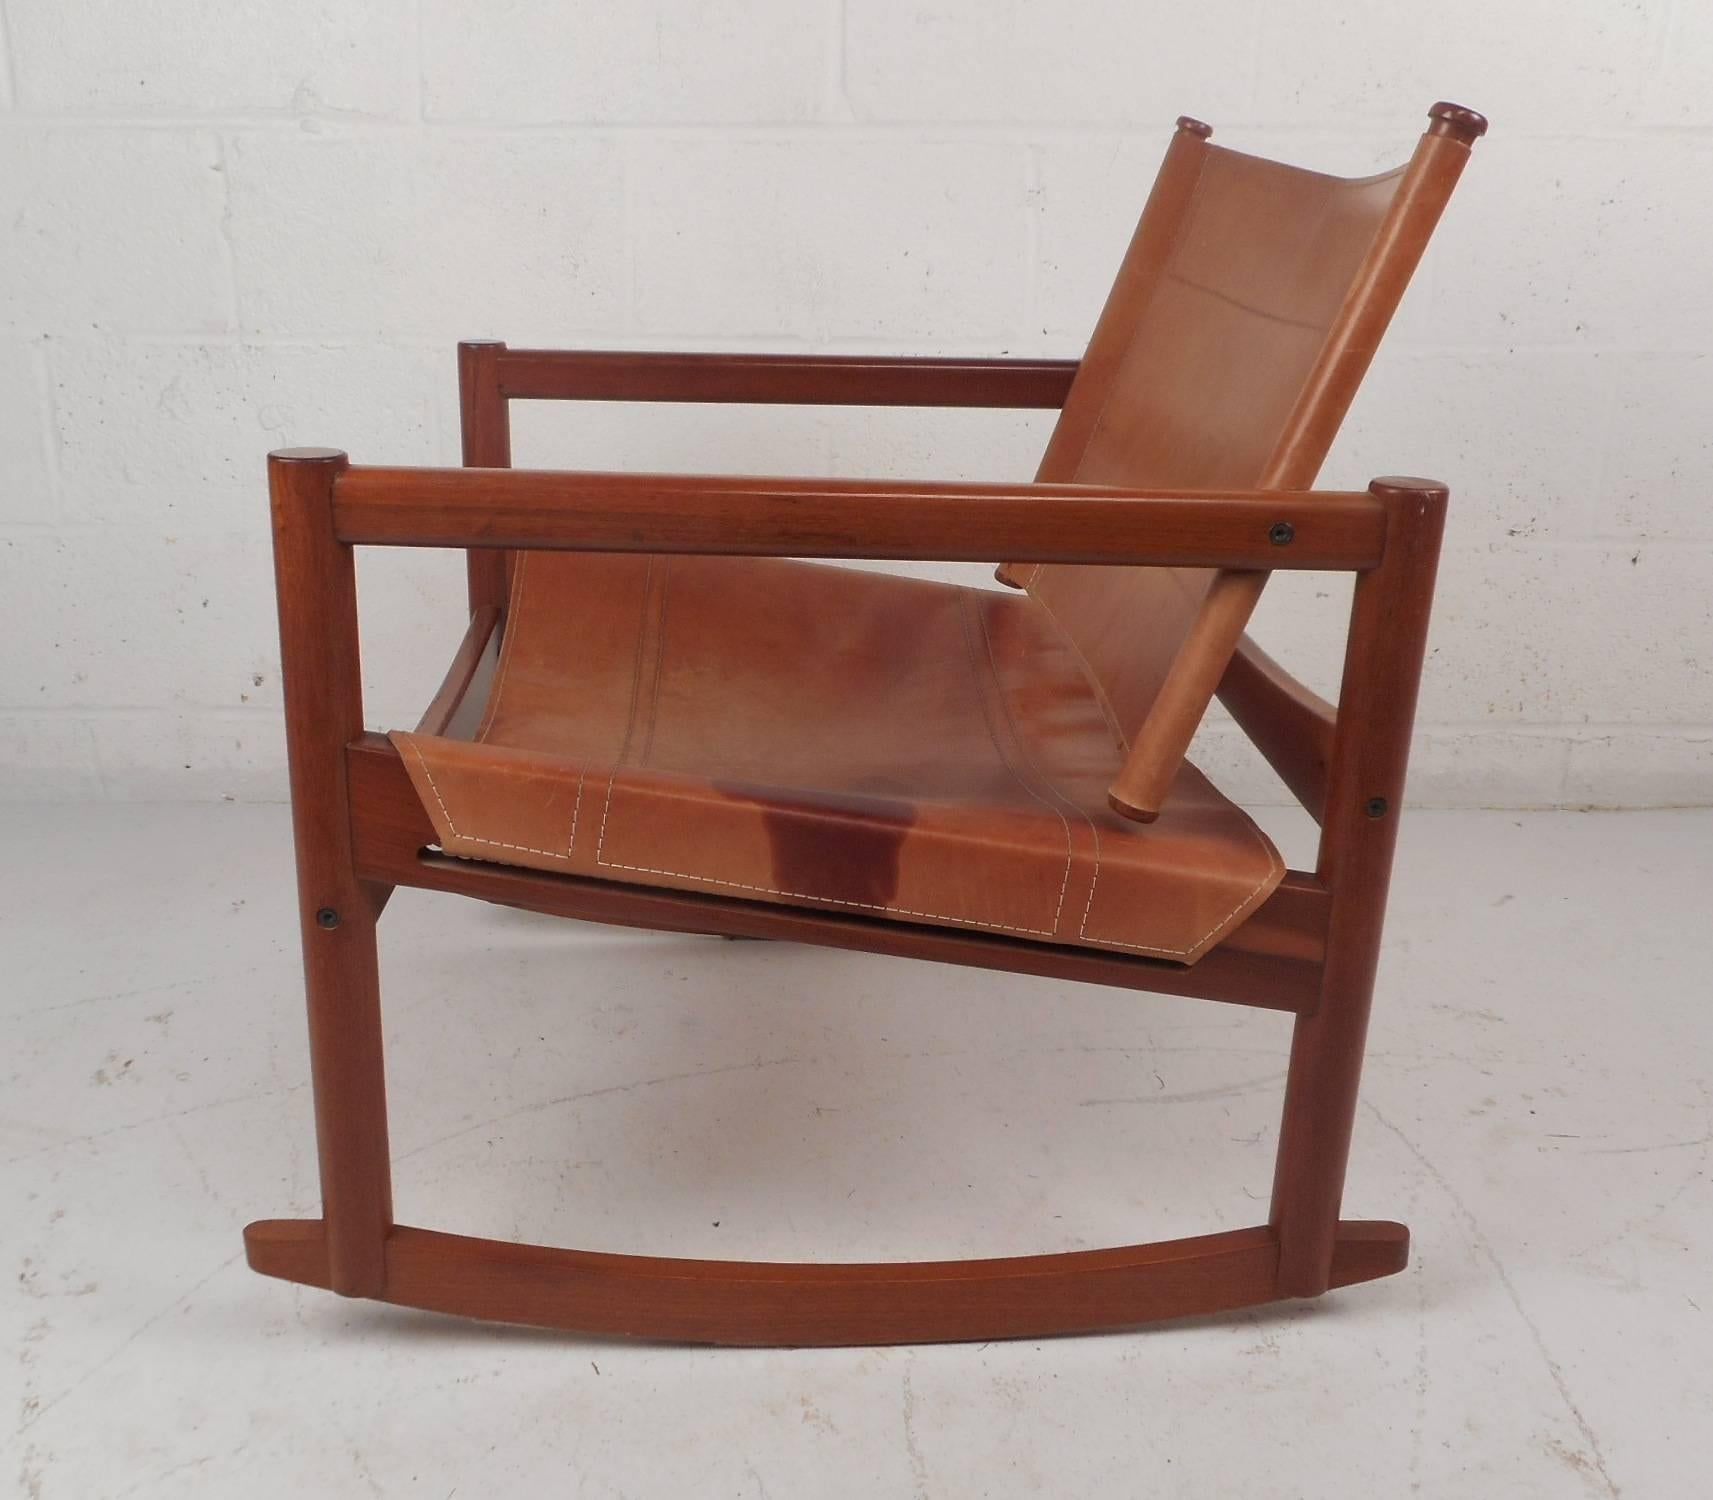 This gorgeous vintage modern rocking chair features leather seating and a wood frame. Unique Brazilian design ensures maximum comfort without sacrificing style. Stunning wood grain and a sculpted frame add to the Mid-Century appeal making this the